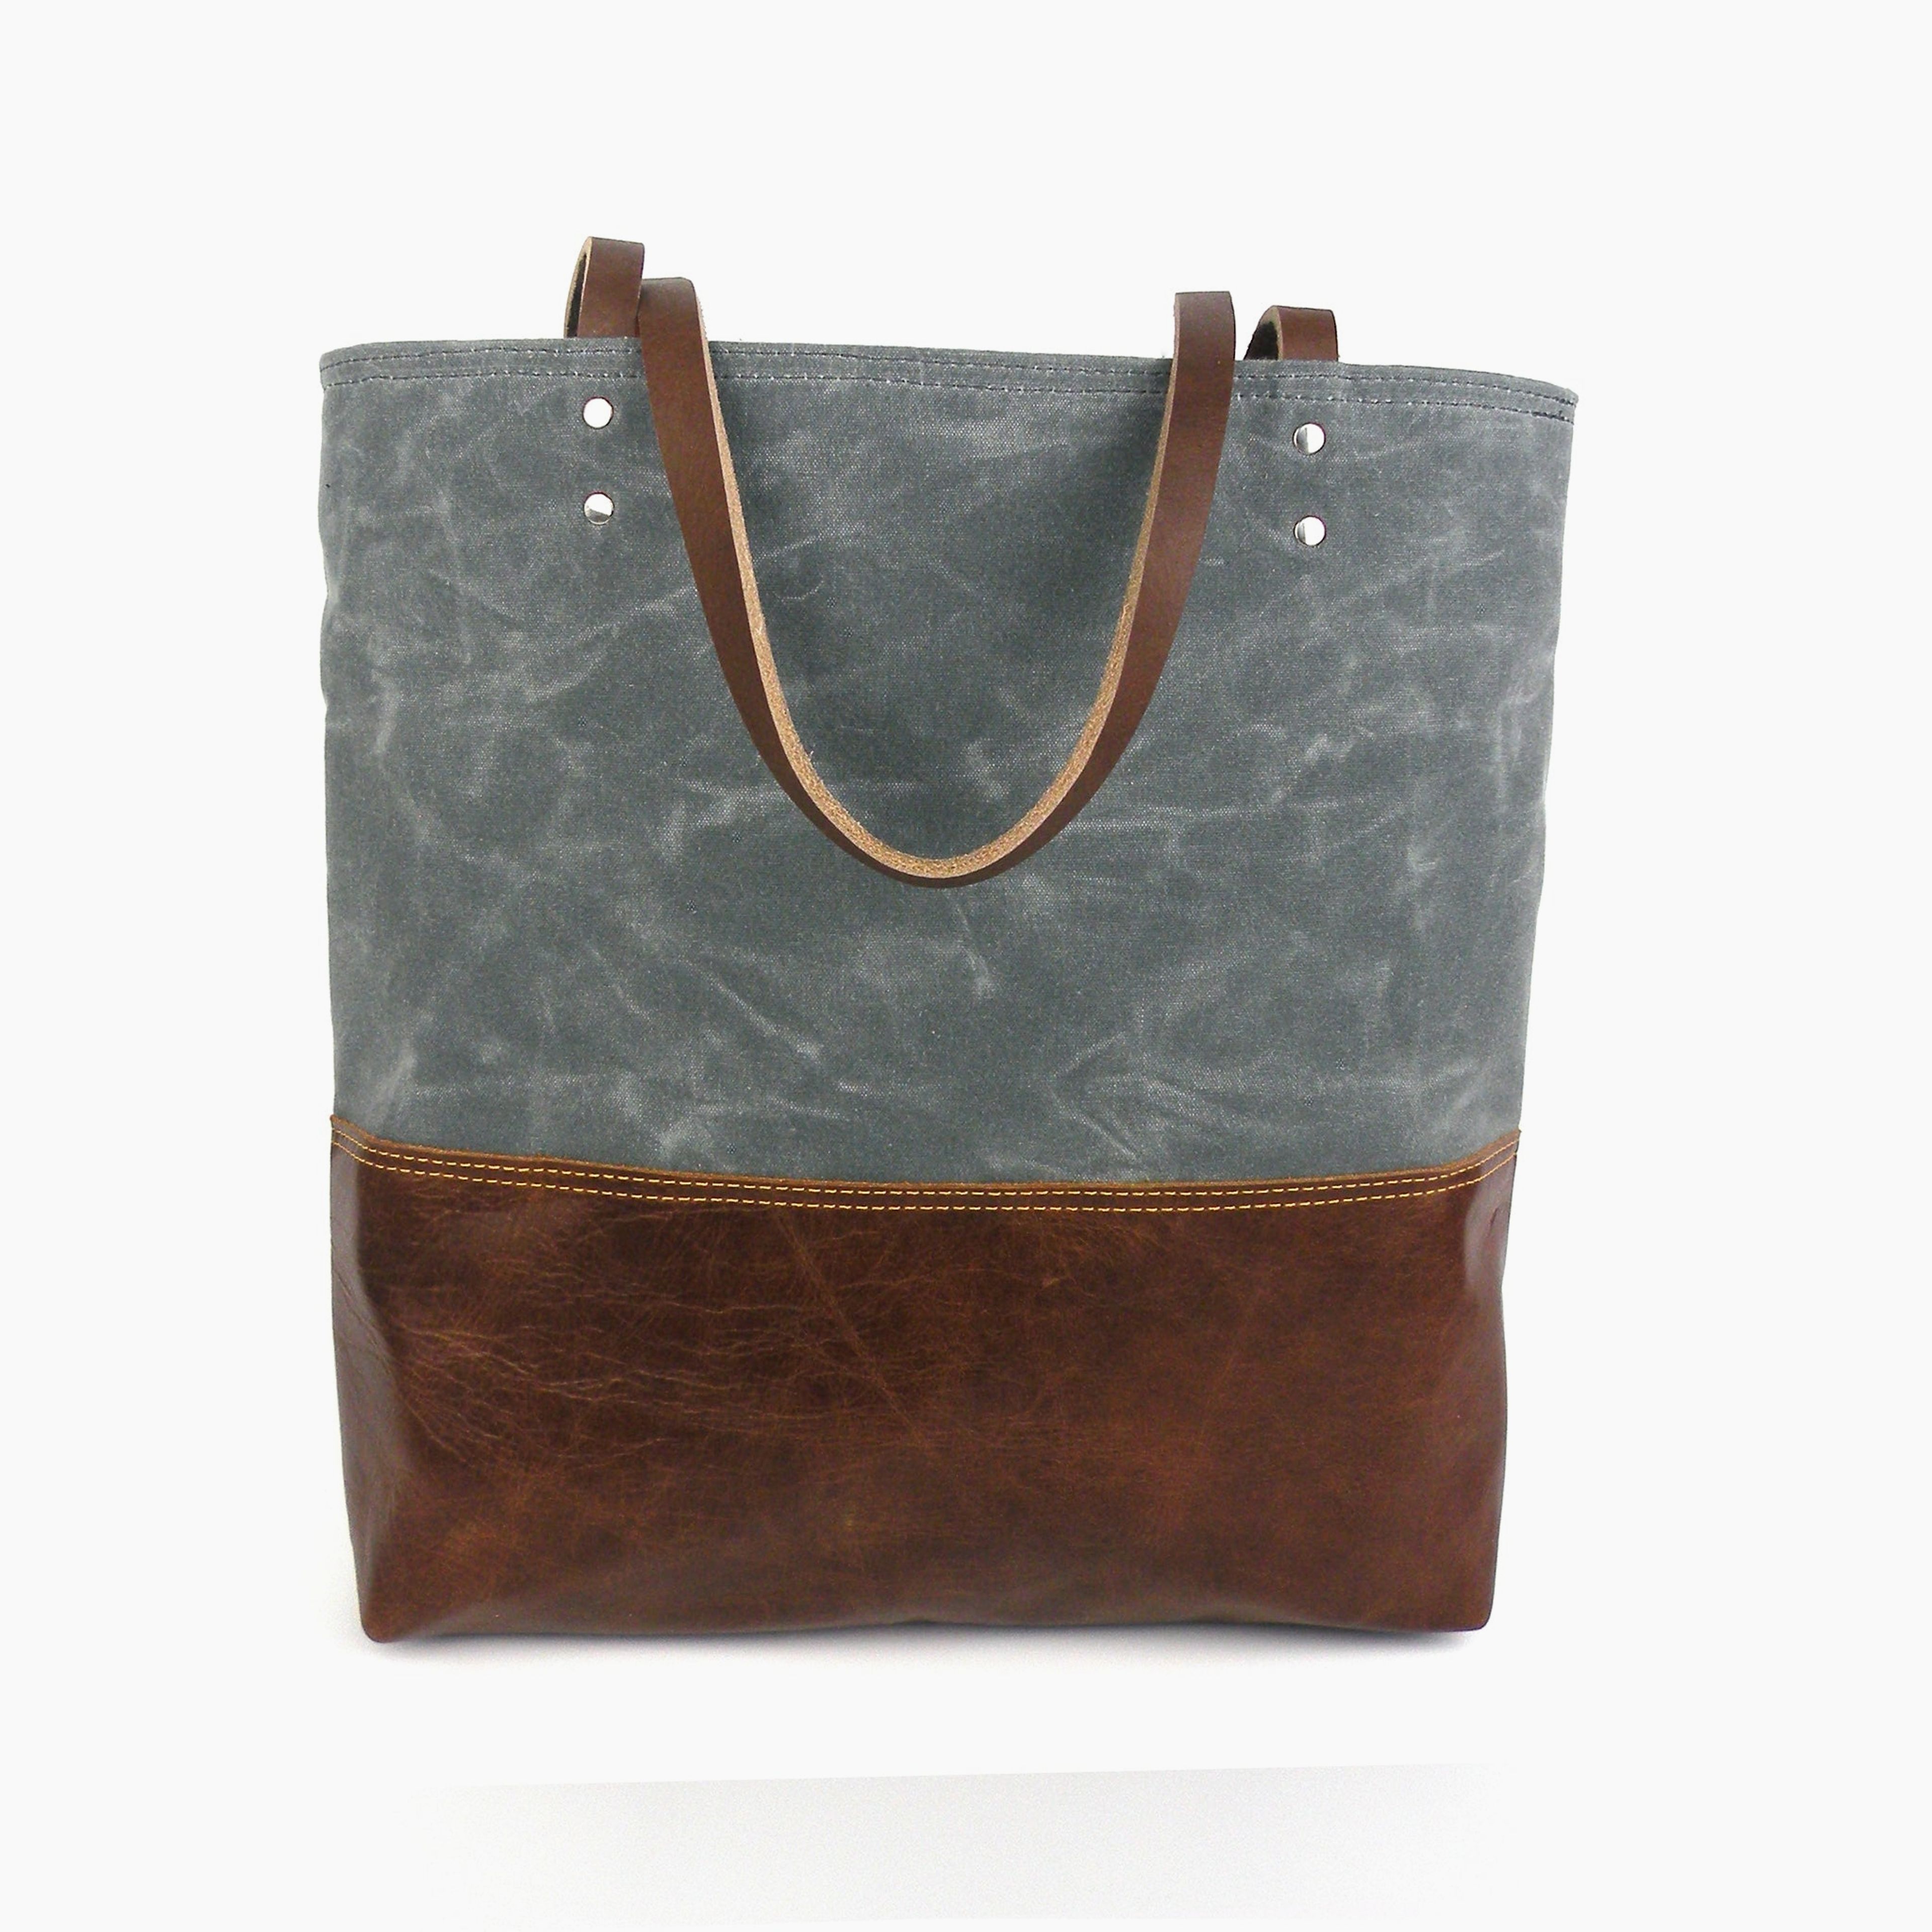 Urban Tote in Charcoal Grey Waxed Canvas and Distressed Leather